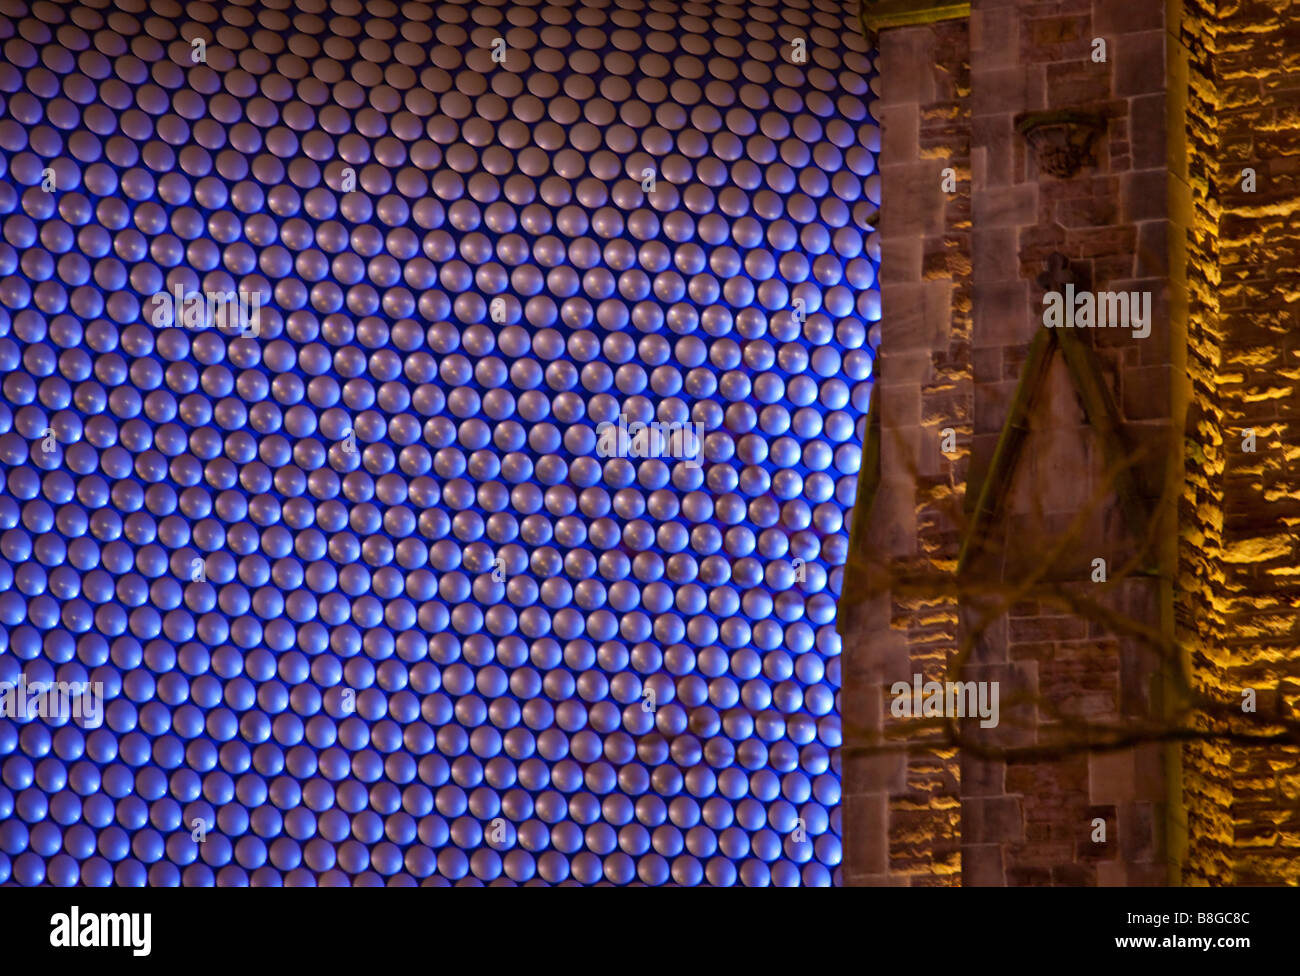 The architecture of Selfridges department store contrasts with St Martins church Birmingham England at night Stock Photo